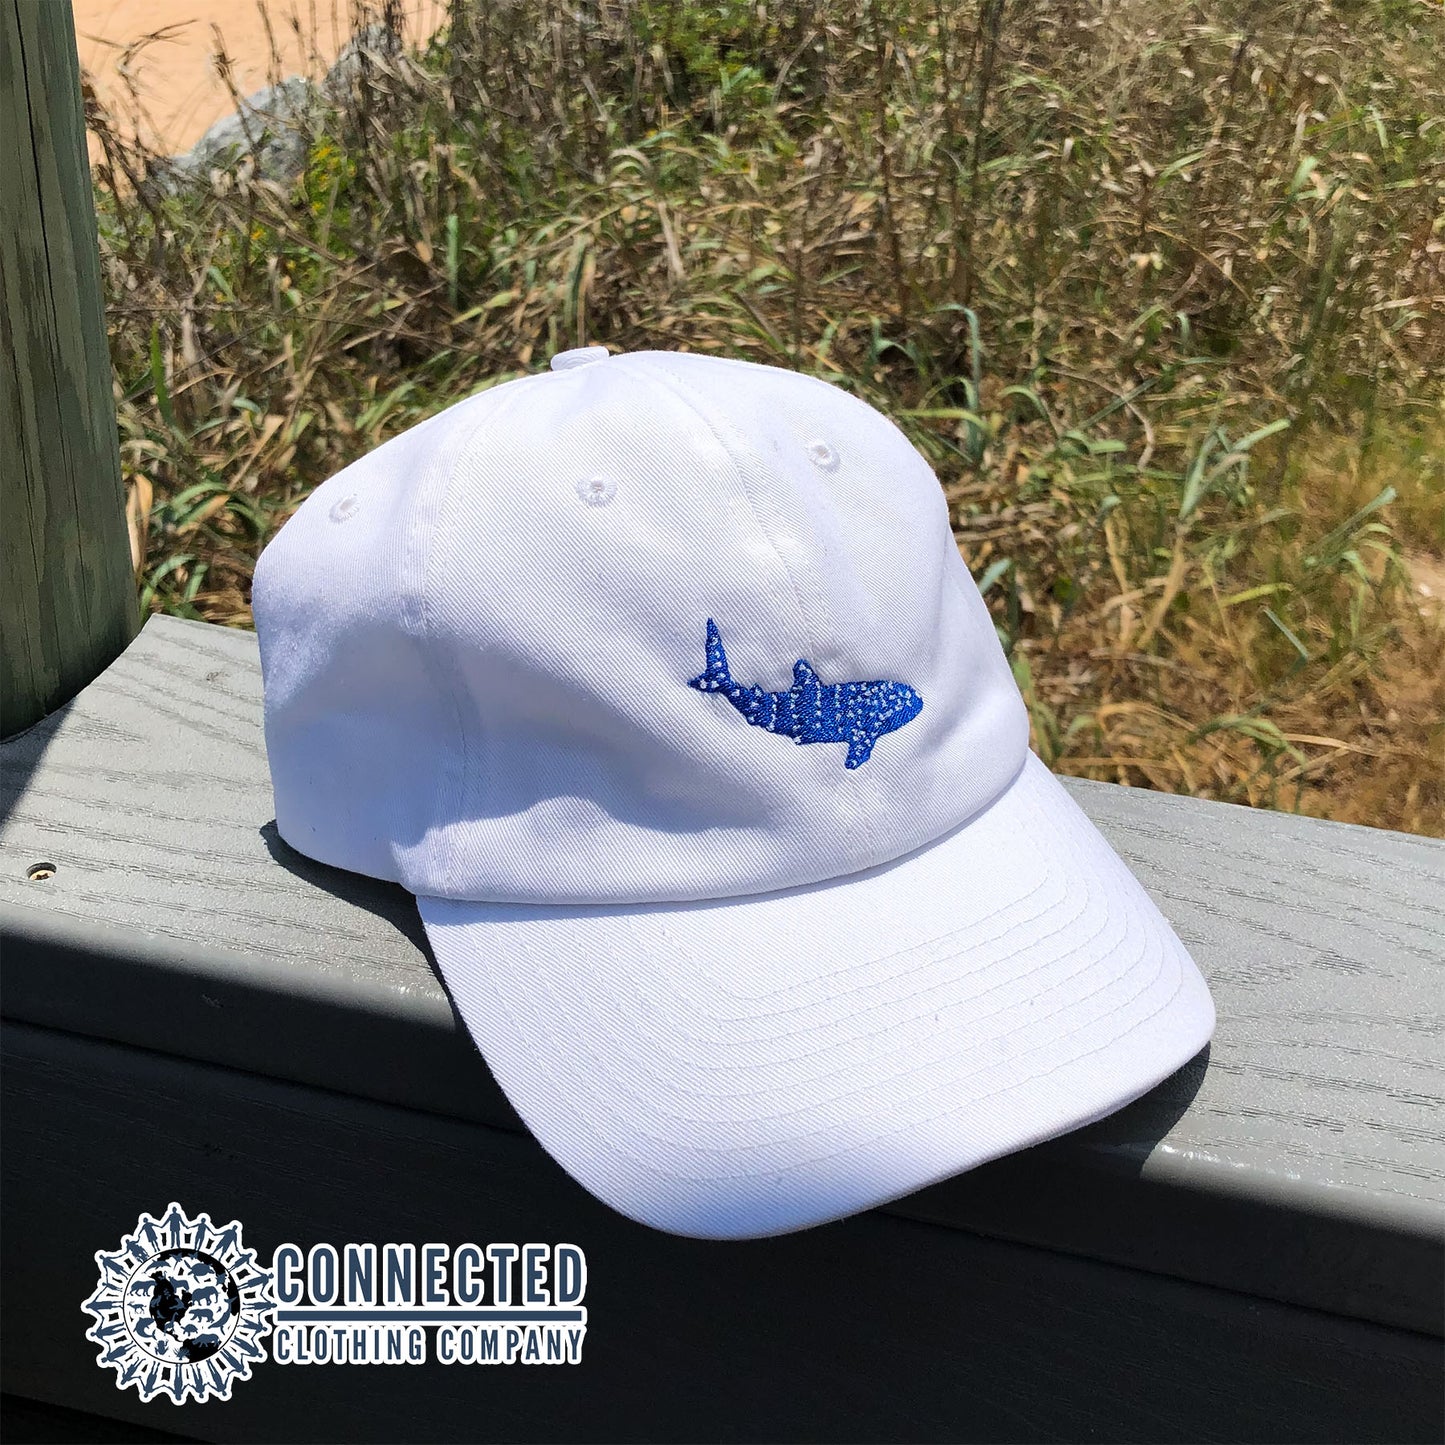 White Whale Shark Cotton Cap - sweetsherriloudesigns - Ethically and Sustainably Made - 10% donated to Mission Blue ocean conservation